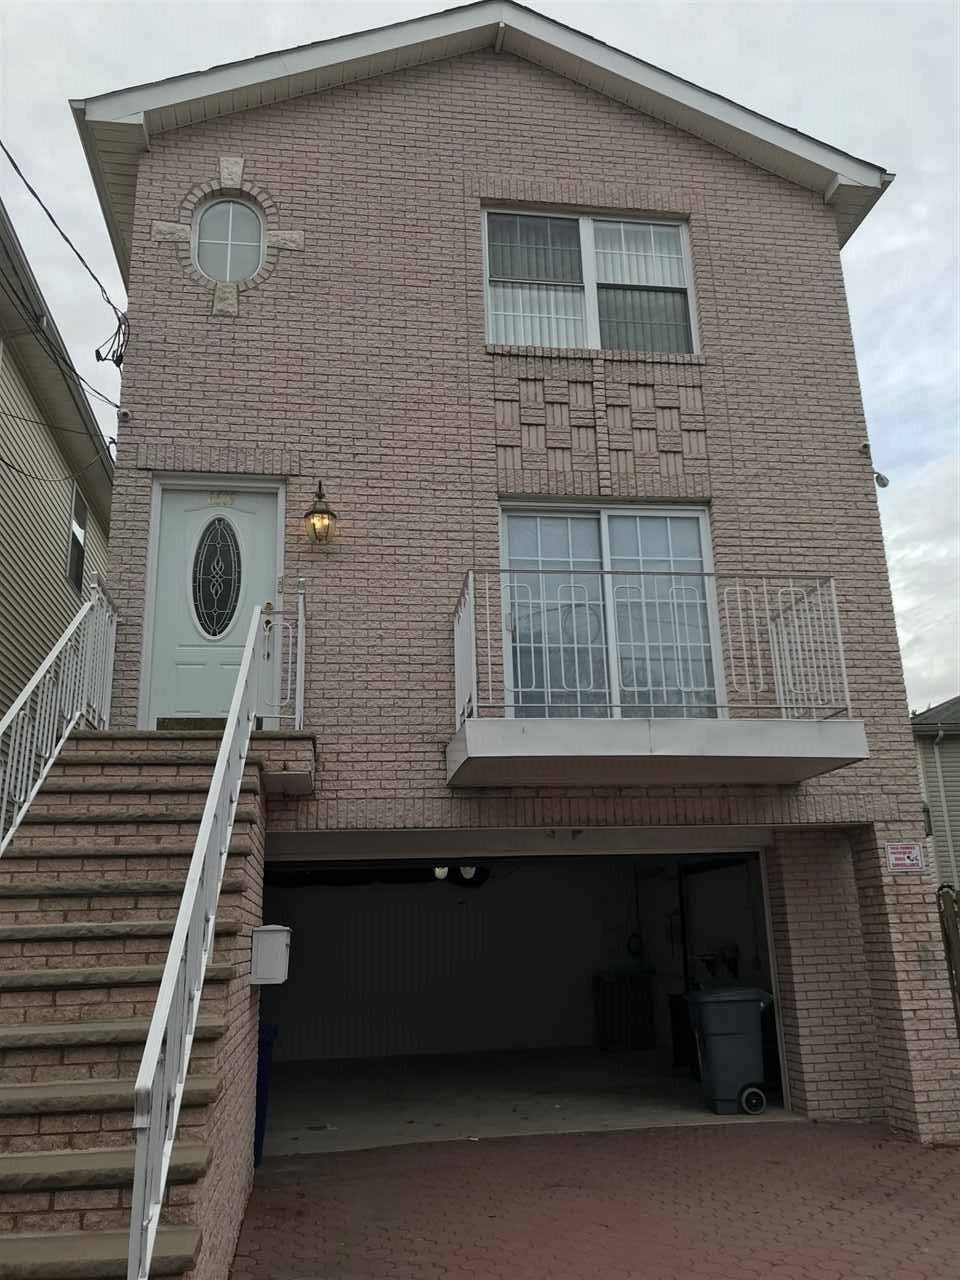 Large 3 bedroom 2 bath with parking in the driveway for rent